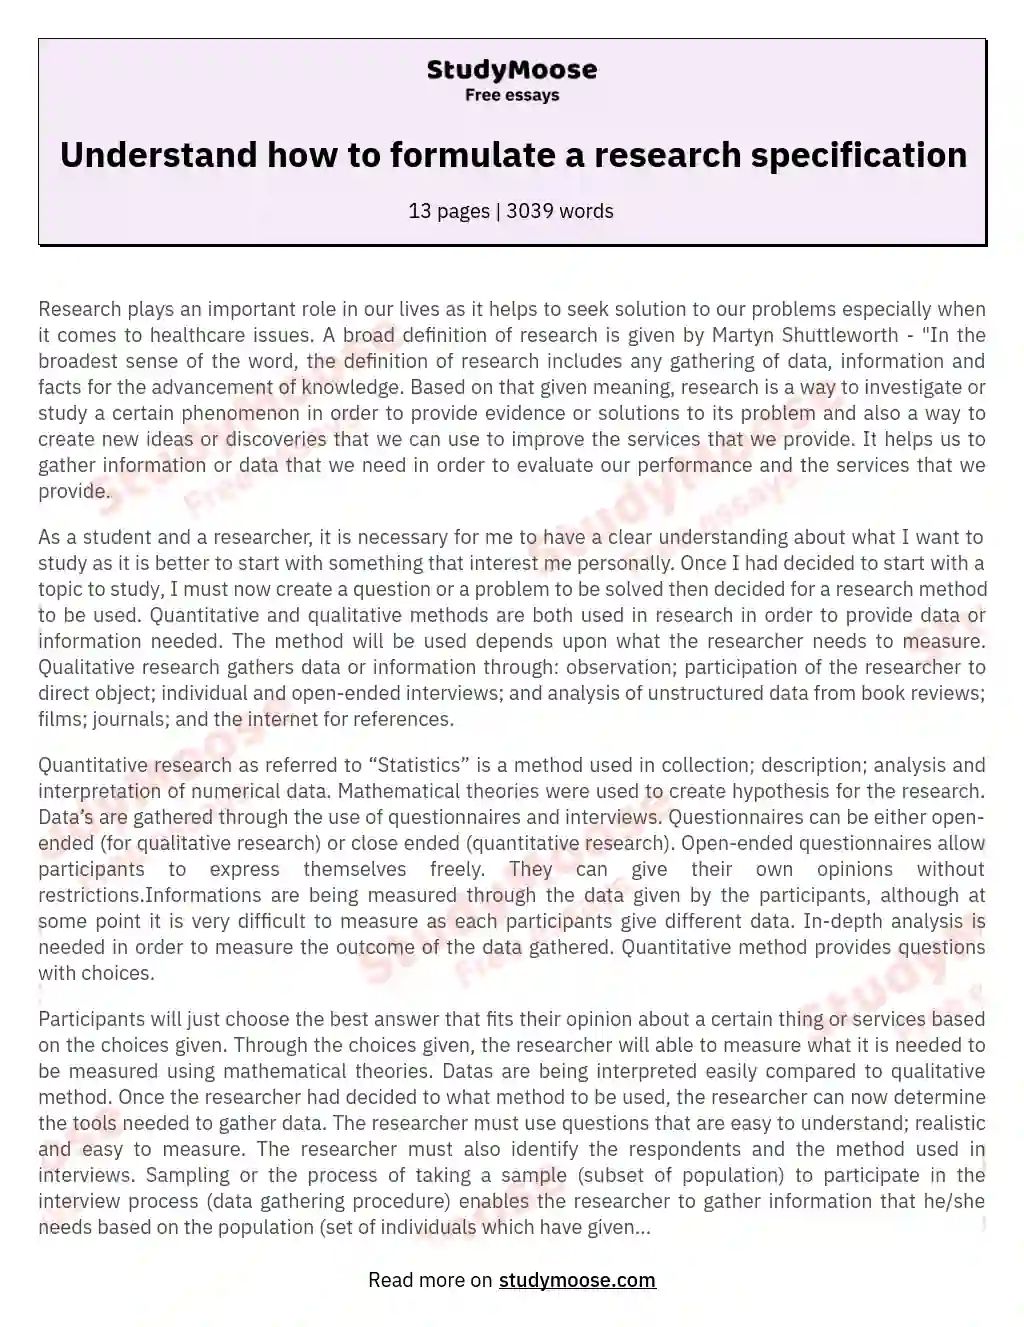 Understand how to formulate a research specification